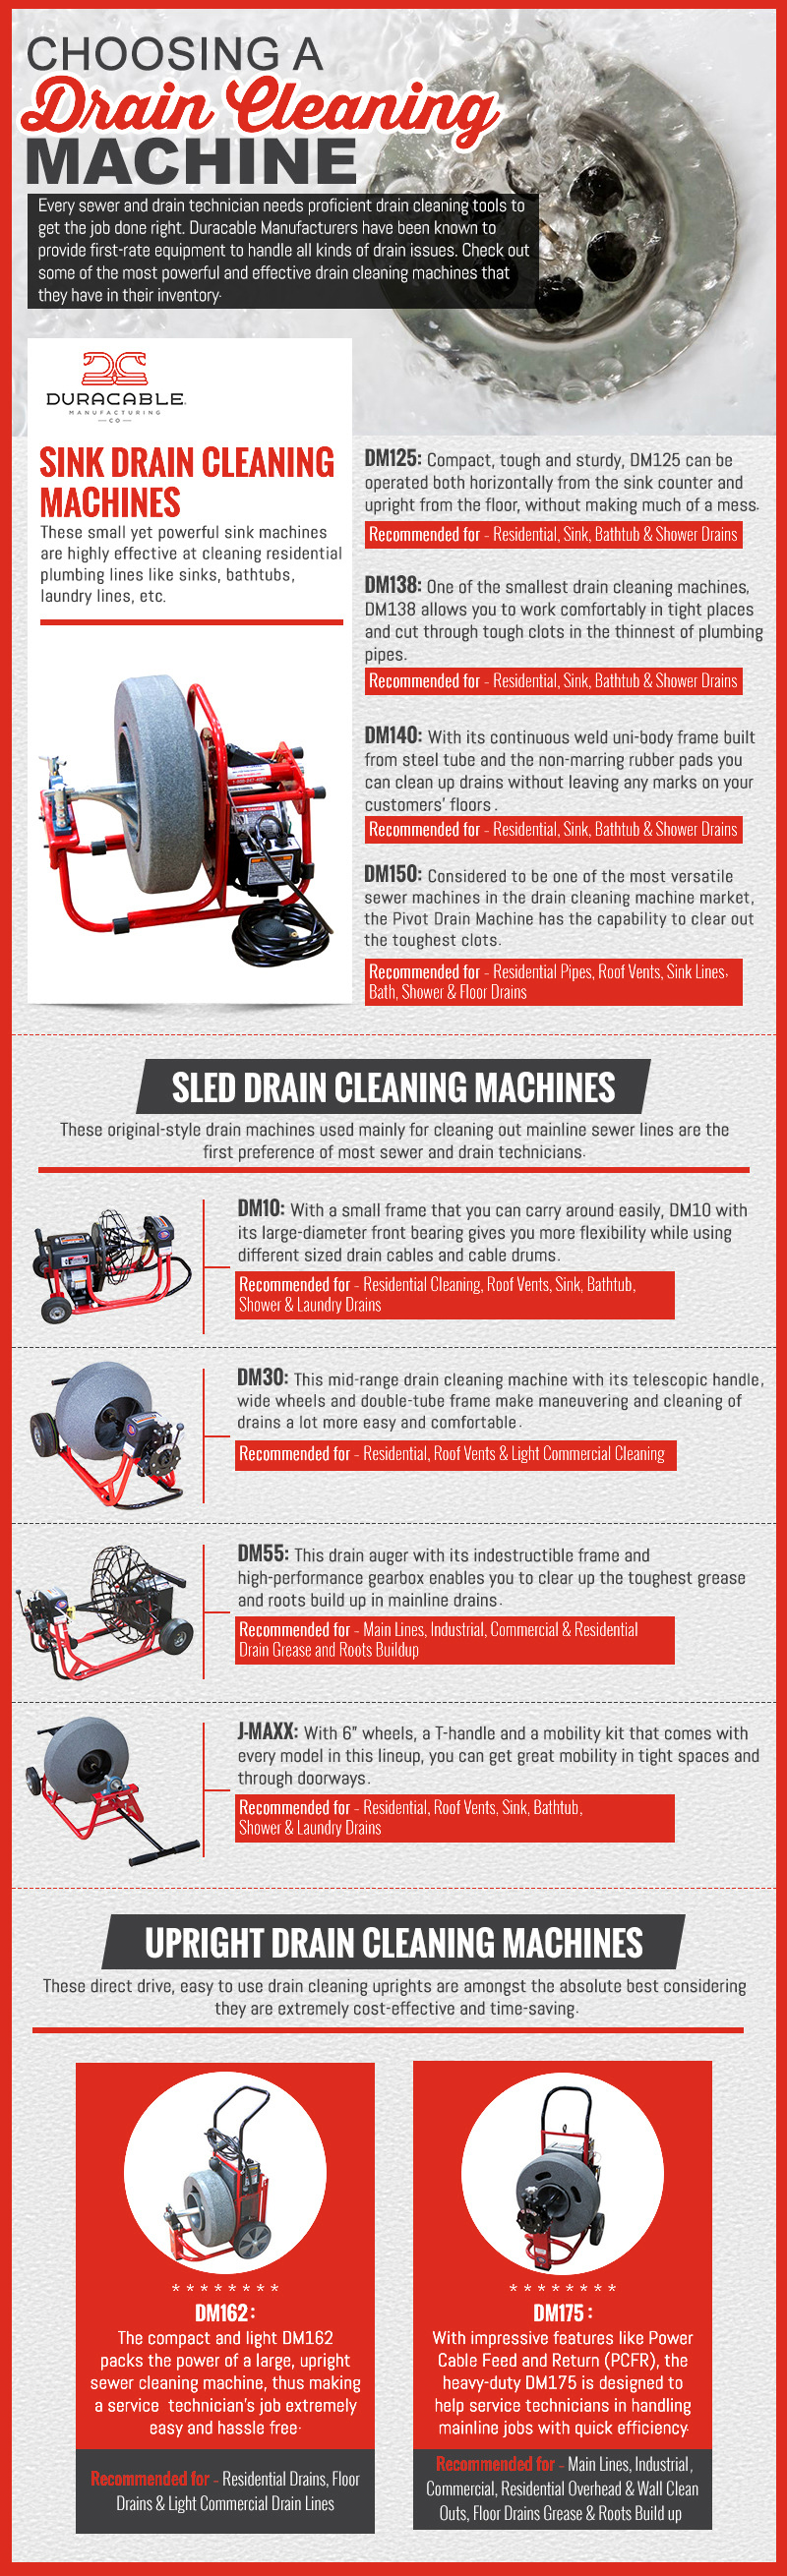 5 Best Drain Cleaning Machines: Your Buying Guide (2022)